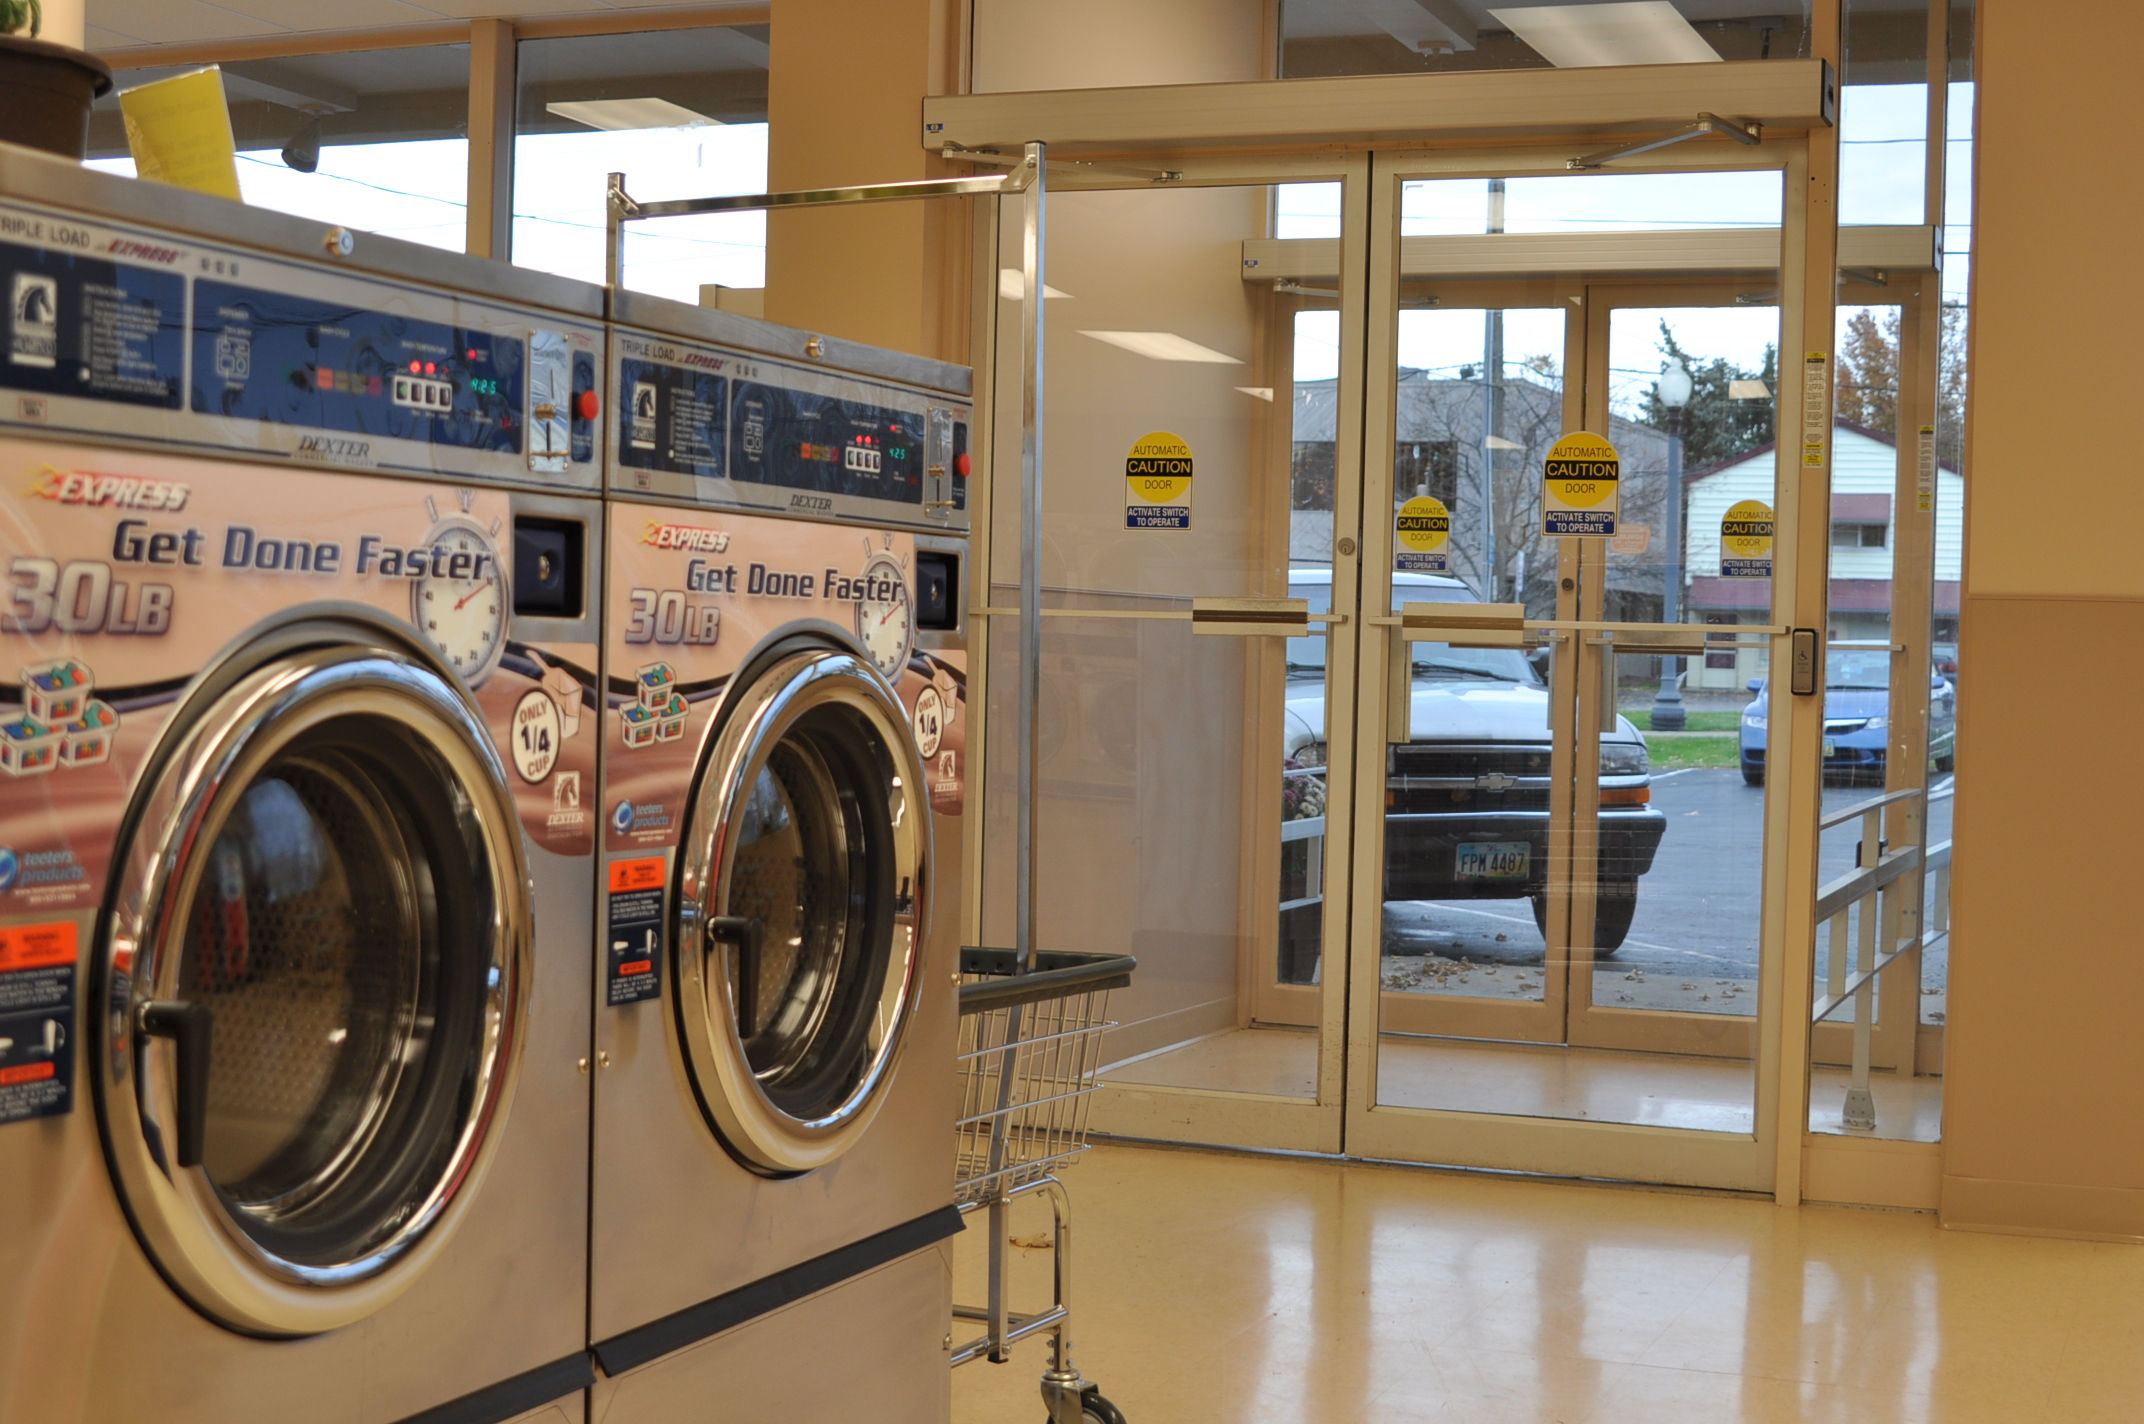 Photo of automatic doors for convenience at a laundromat